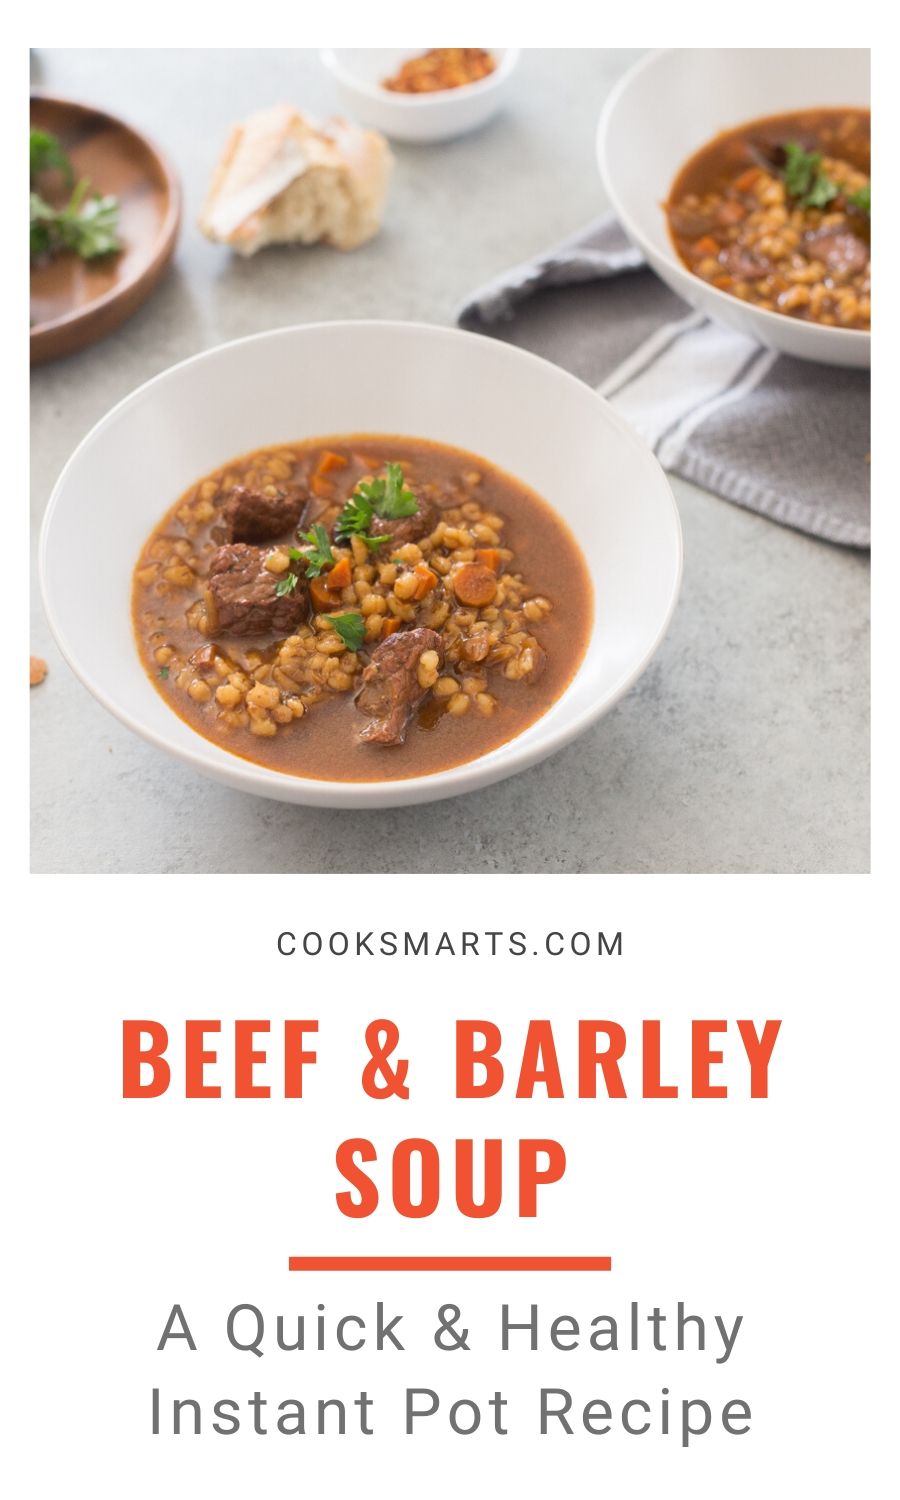 Instant Pot Beef and Barley Soup Recipe | Cook Smarts